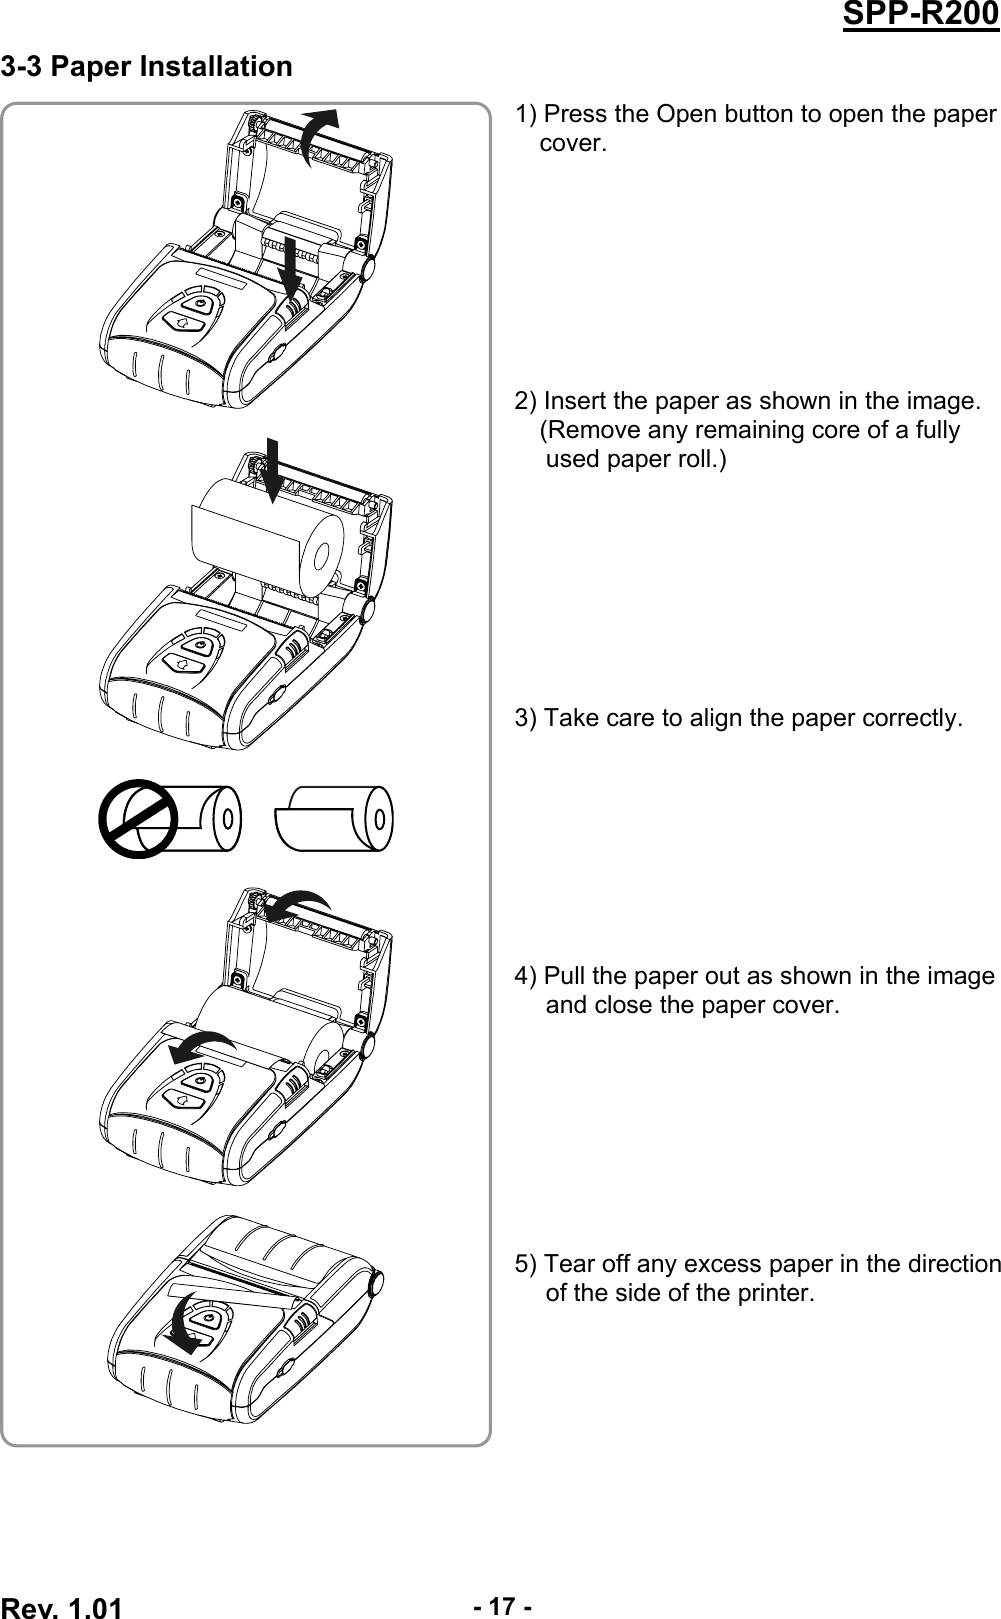  Rev. 1.01  - 17 -SPP-R2003-3 Paper Installation 1) Press the Open button to open the paper cover.         2) Insert the paper as shown in the image. (Remove any remaining core of a fully used paper roll.)         3) Take care to align the paper correctly.         4) Pull the paper out as shown in the image and close the paper cover.         5) Tear off any excess paper in the direction of the side of the printer.          